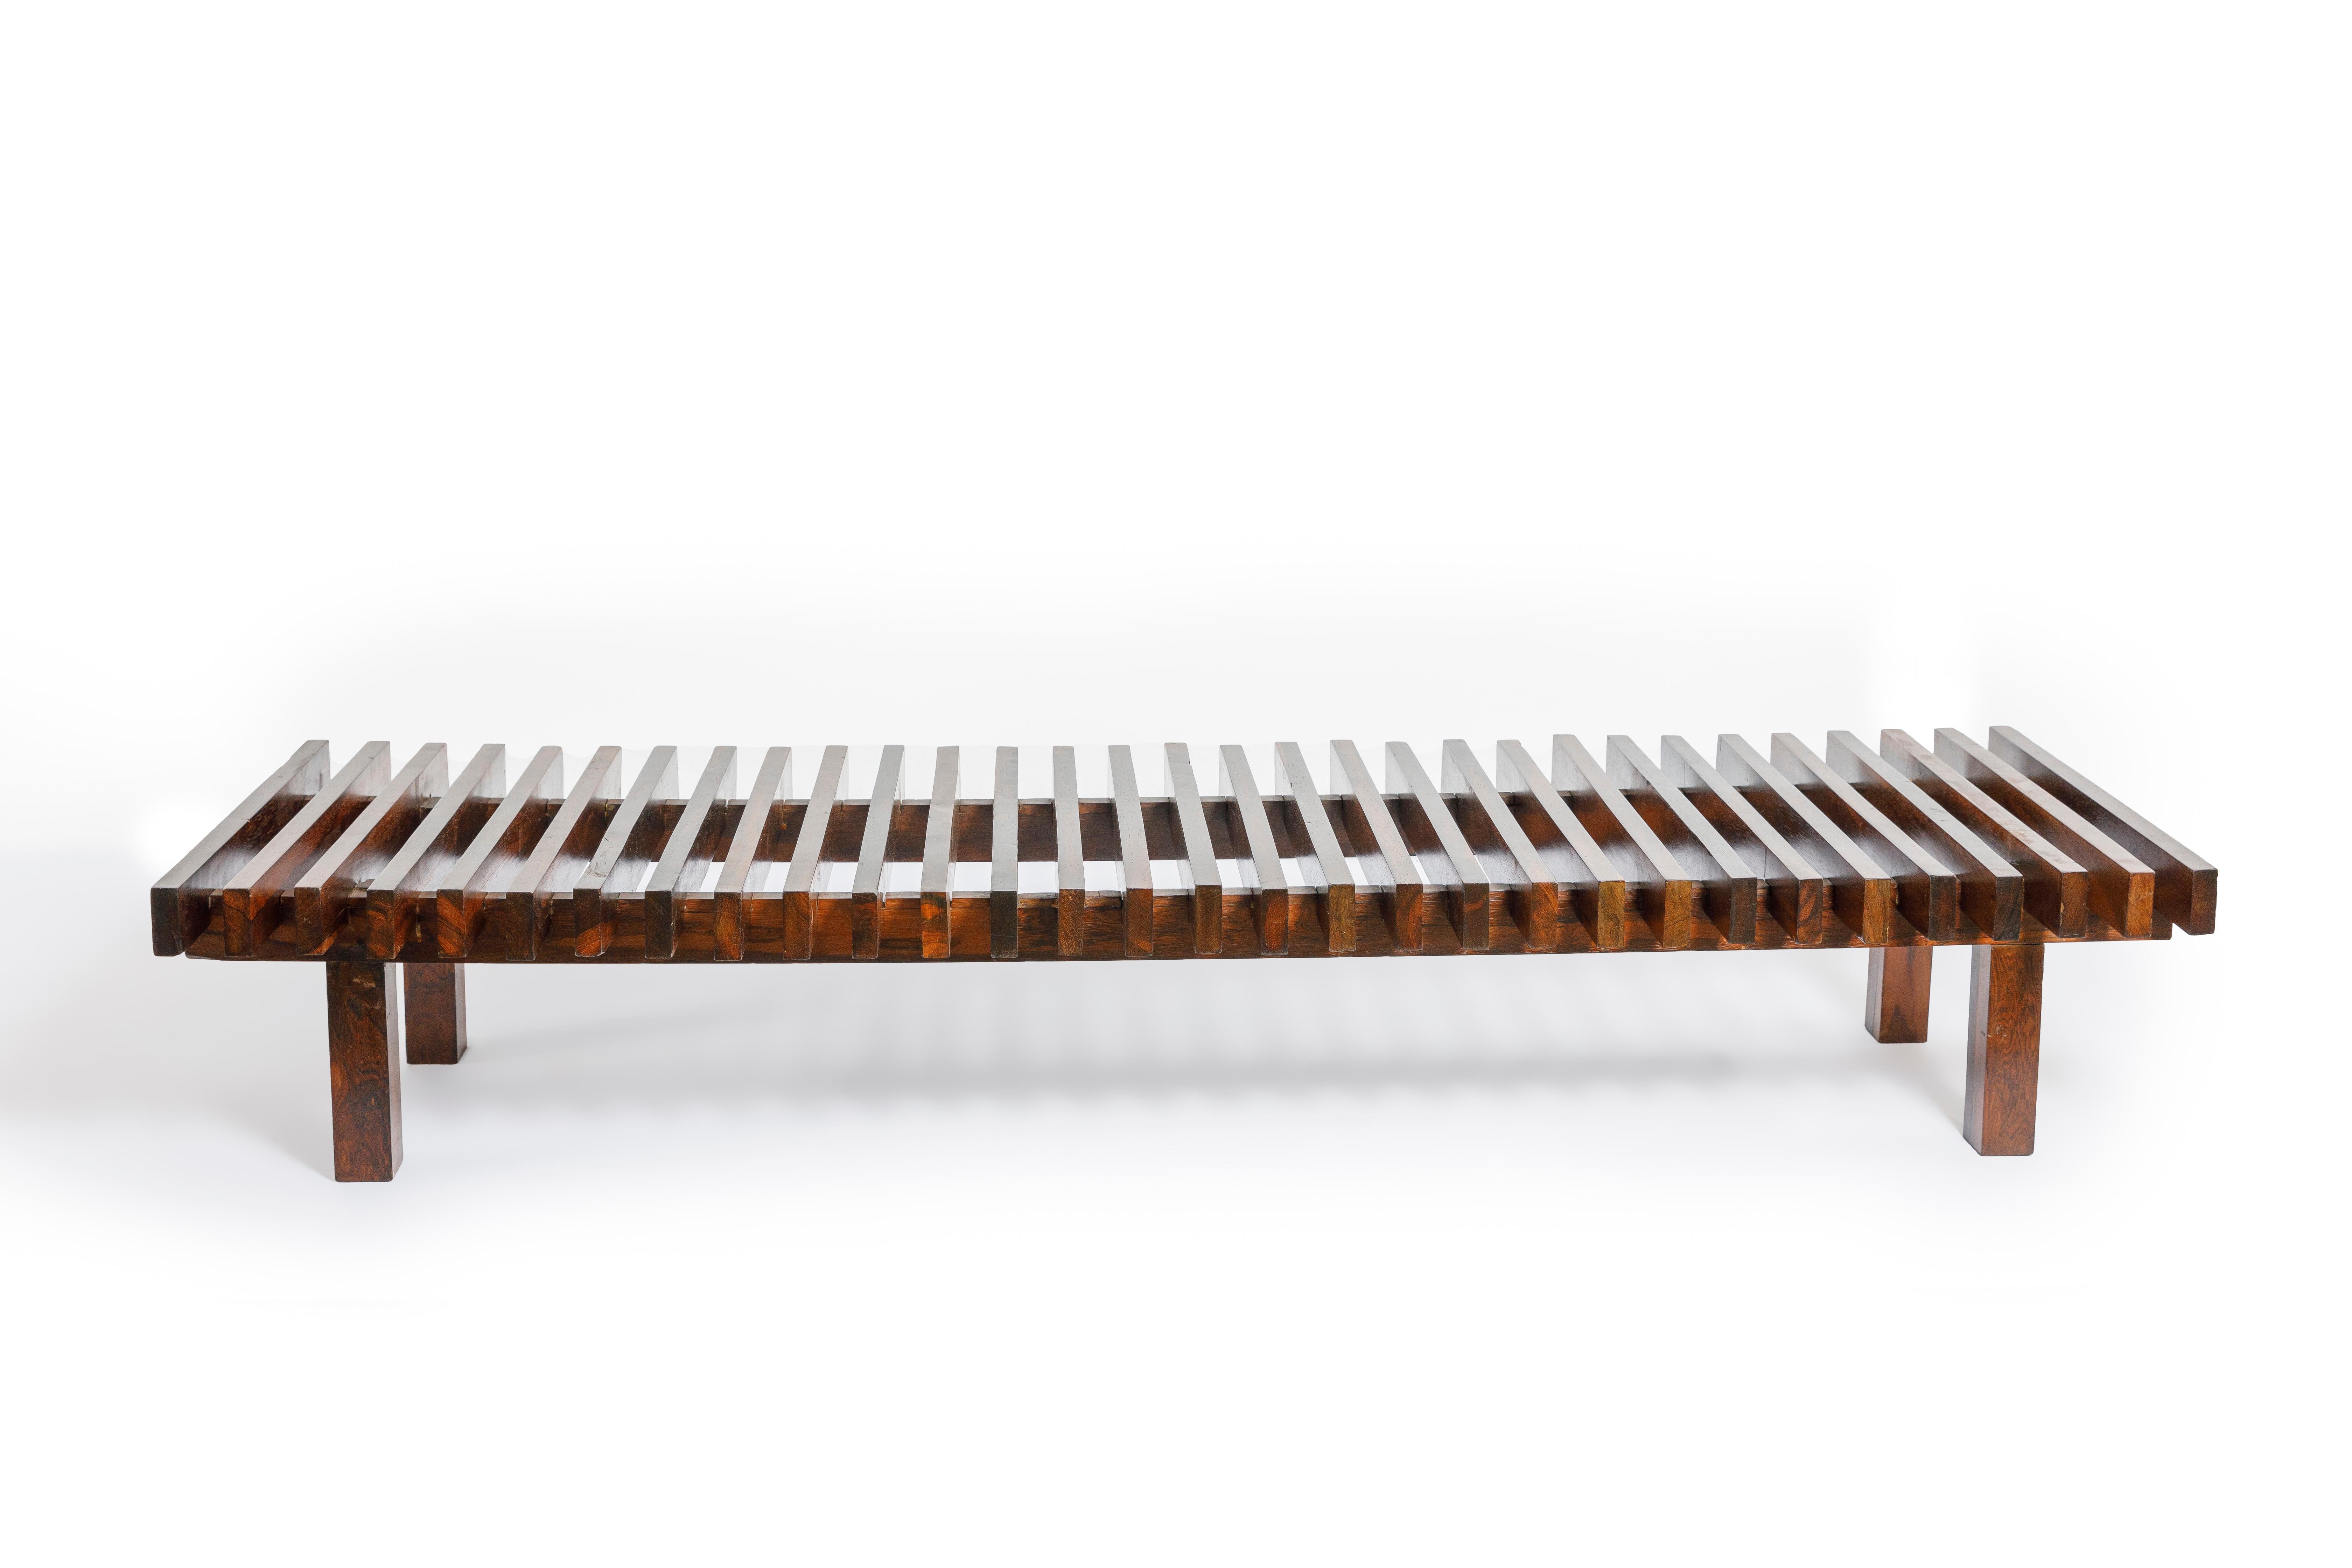 Slatted bench produced in Brazil in the 1970s by Forma Manufacture. 
This beautiful piece's seating is composed of regularly arranged solid Brazilian hardwood slats, finished with natural varnish maintaining the wood's character. 
The feet are